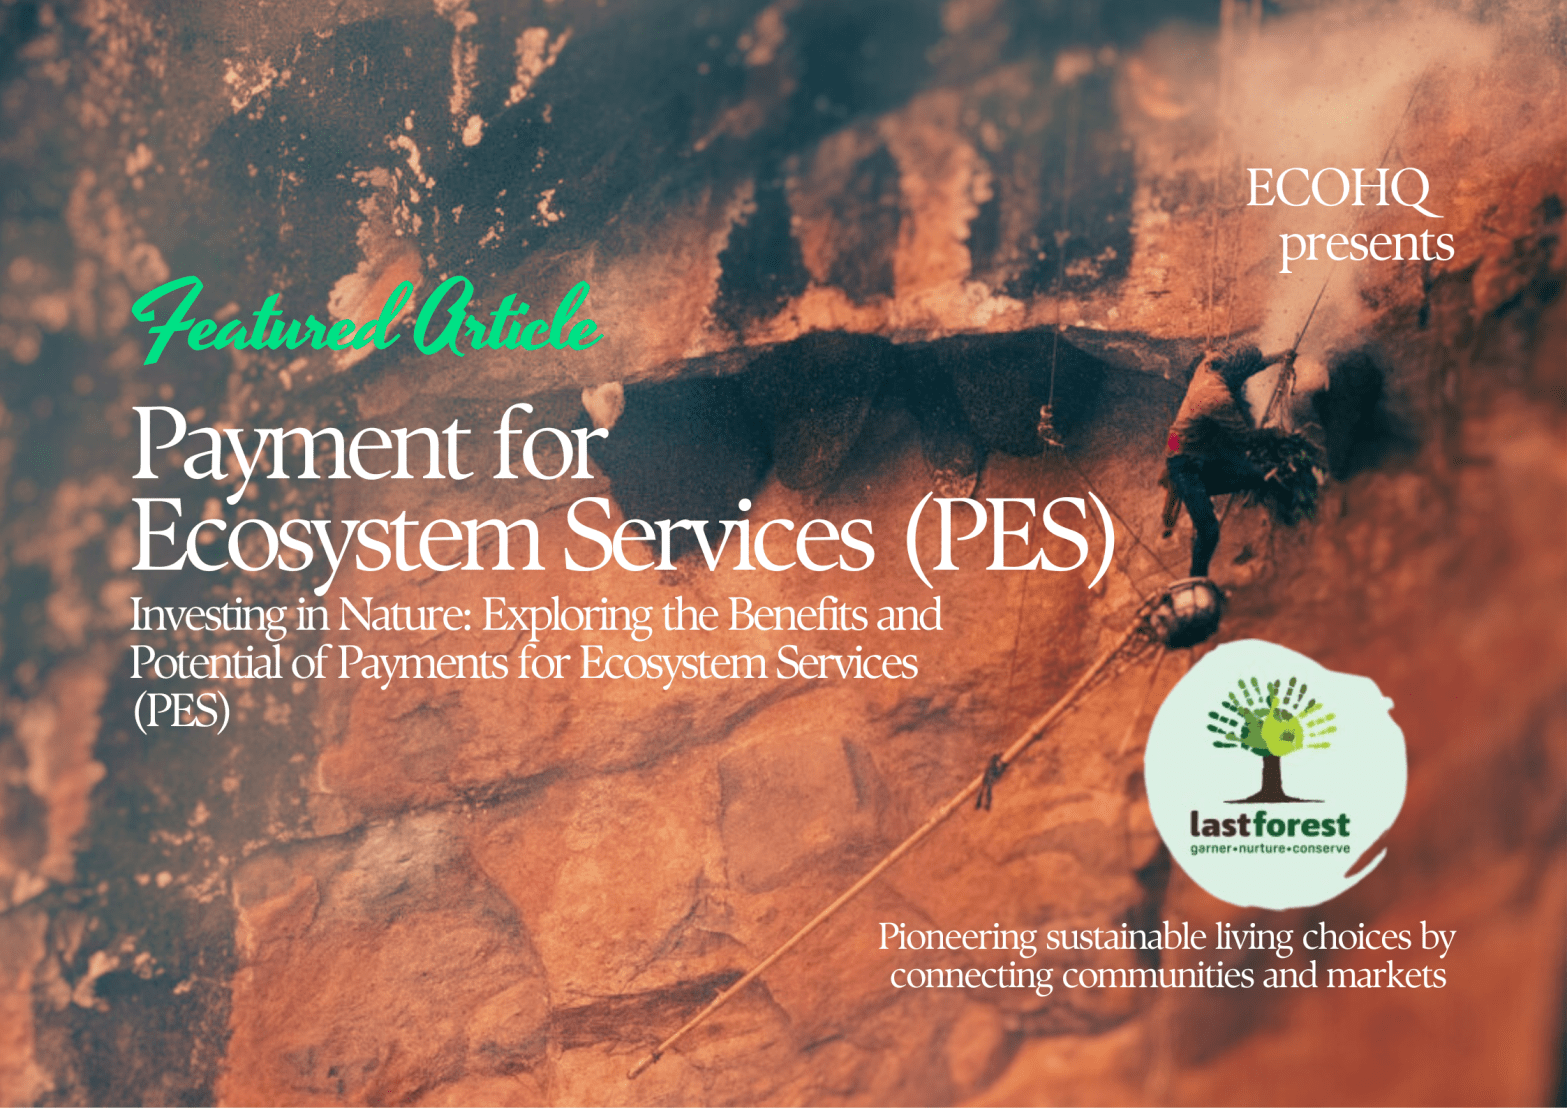 Investing in Nature: Exploring the Benefits and Potential of Payments for Ecosystem Services (PES)